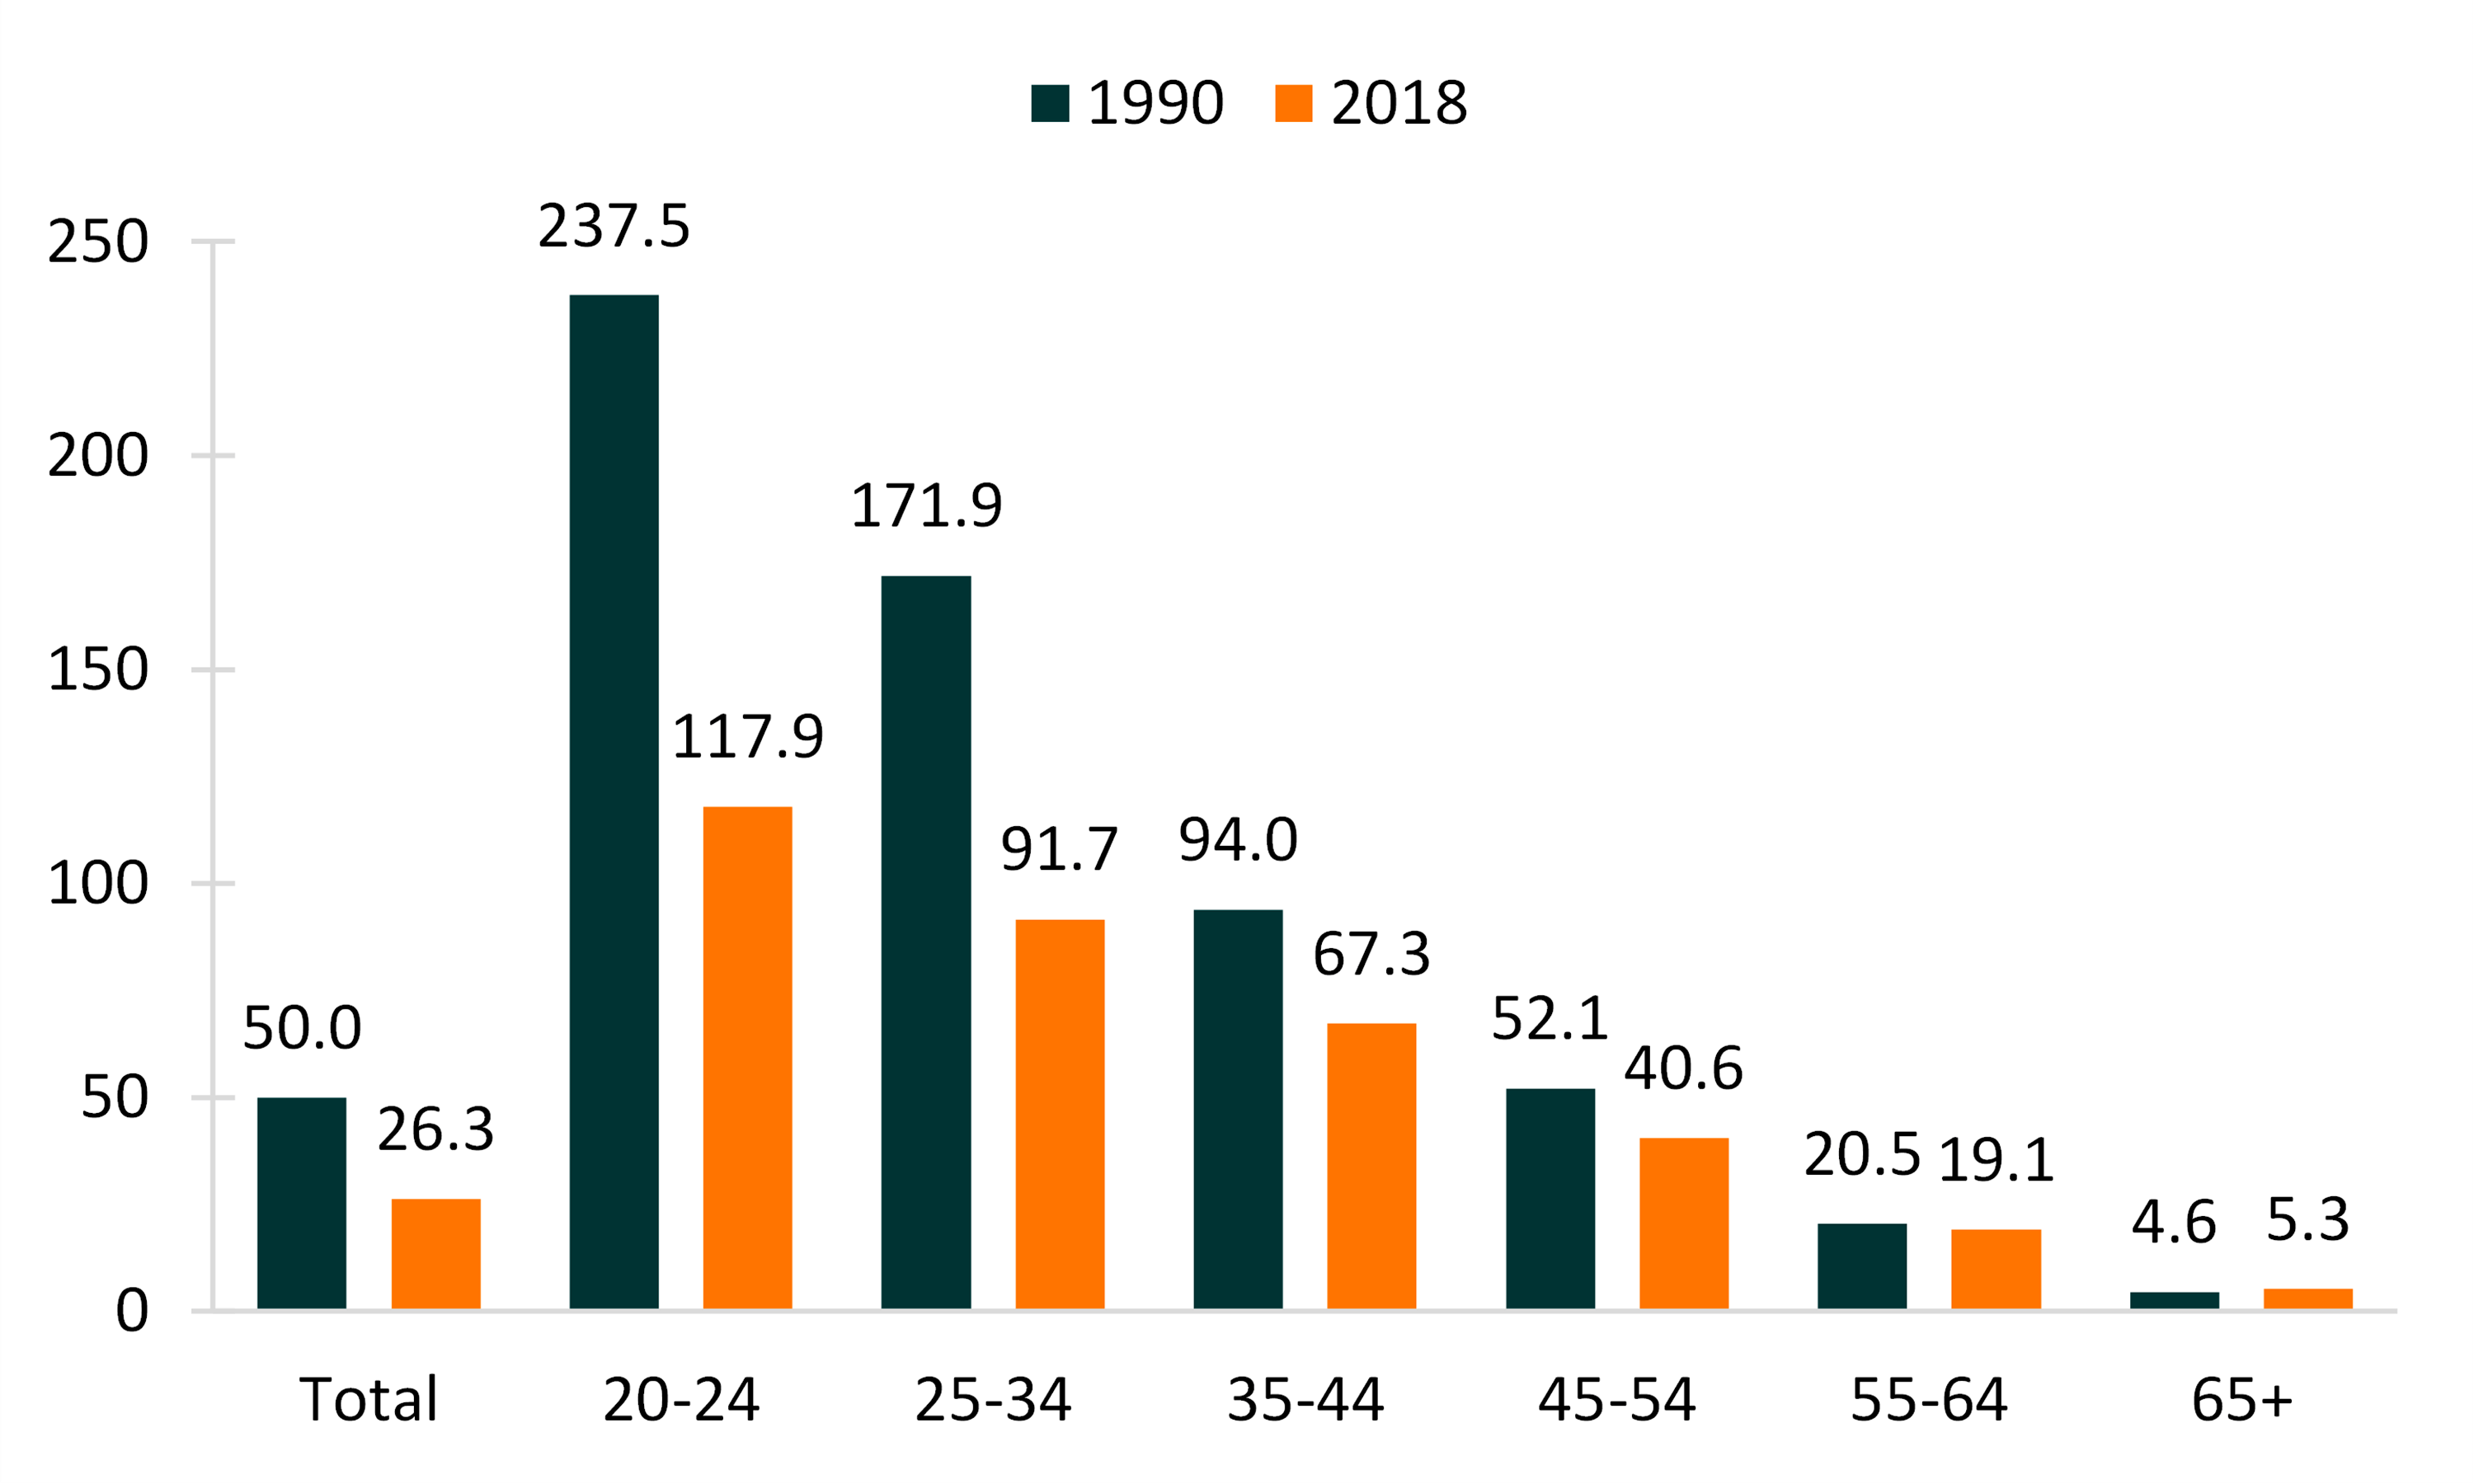 teal and orange bar chart showing Figure 1. Remarriage Rates by Age Groups, 1990 & 2018 